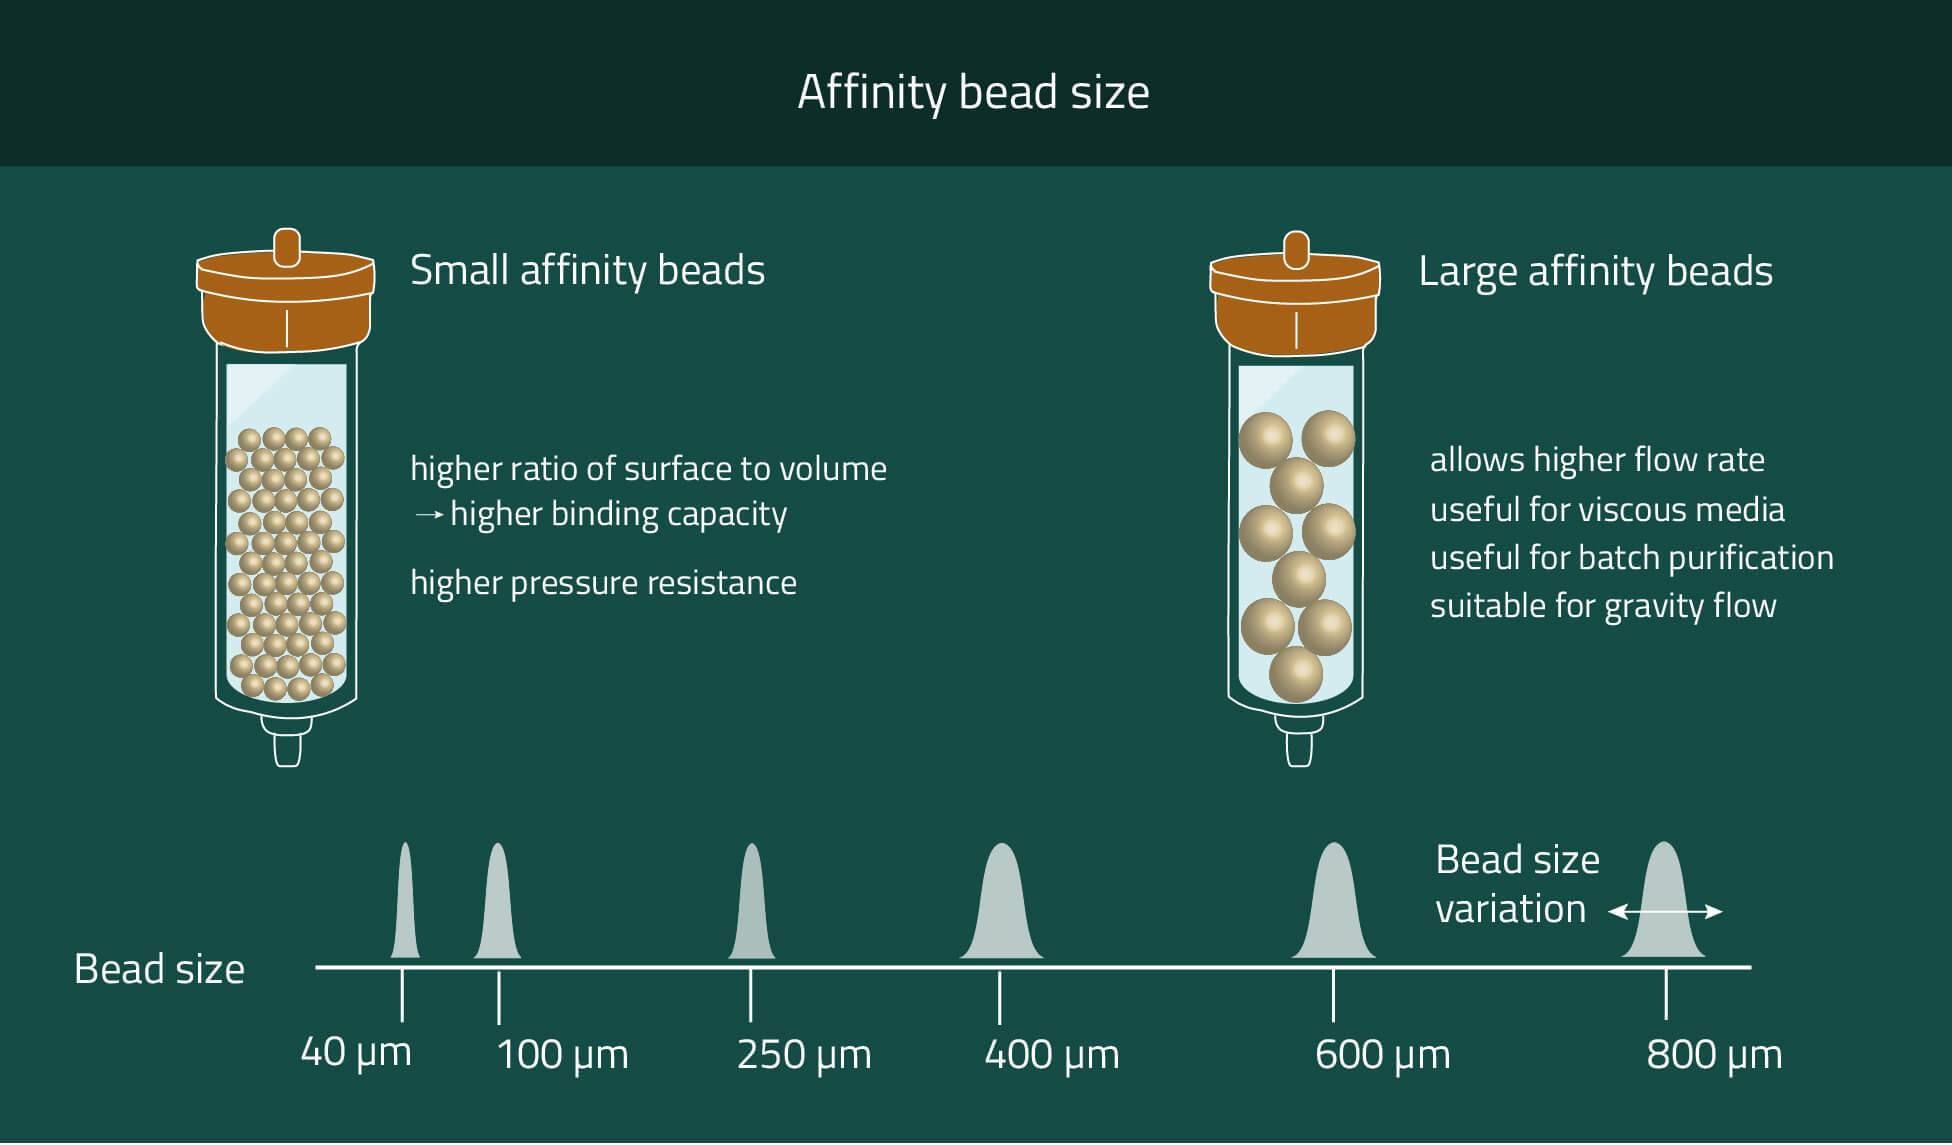 Overview of different agarose bead sizes and their individual advantages